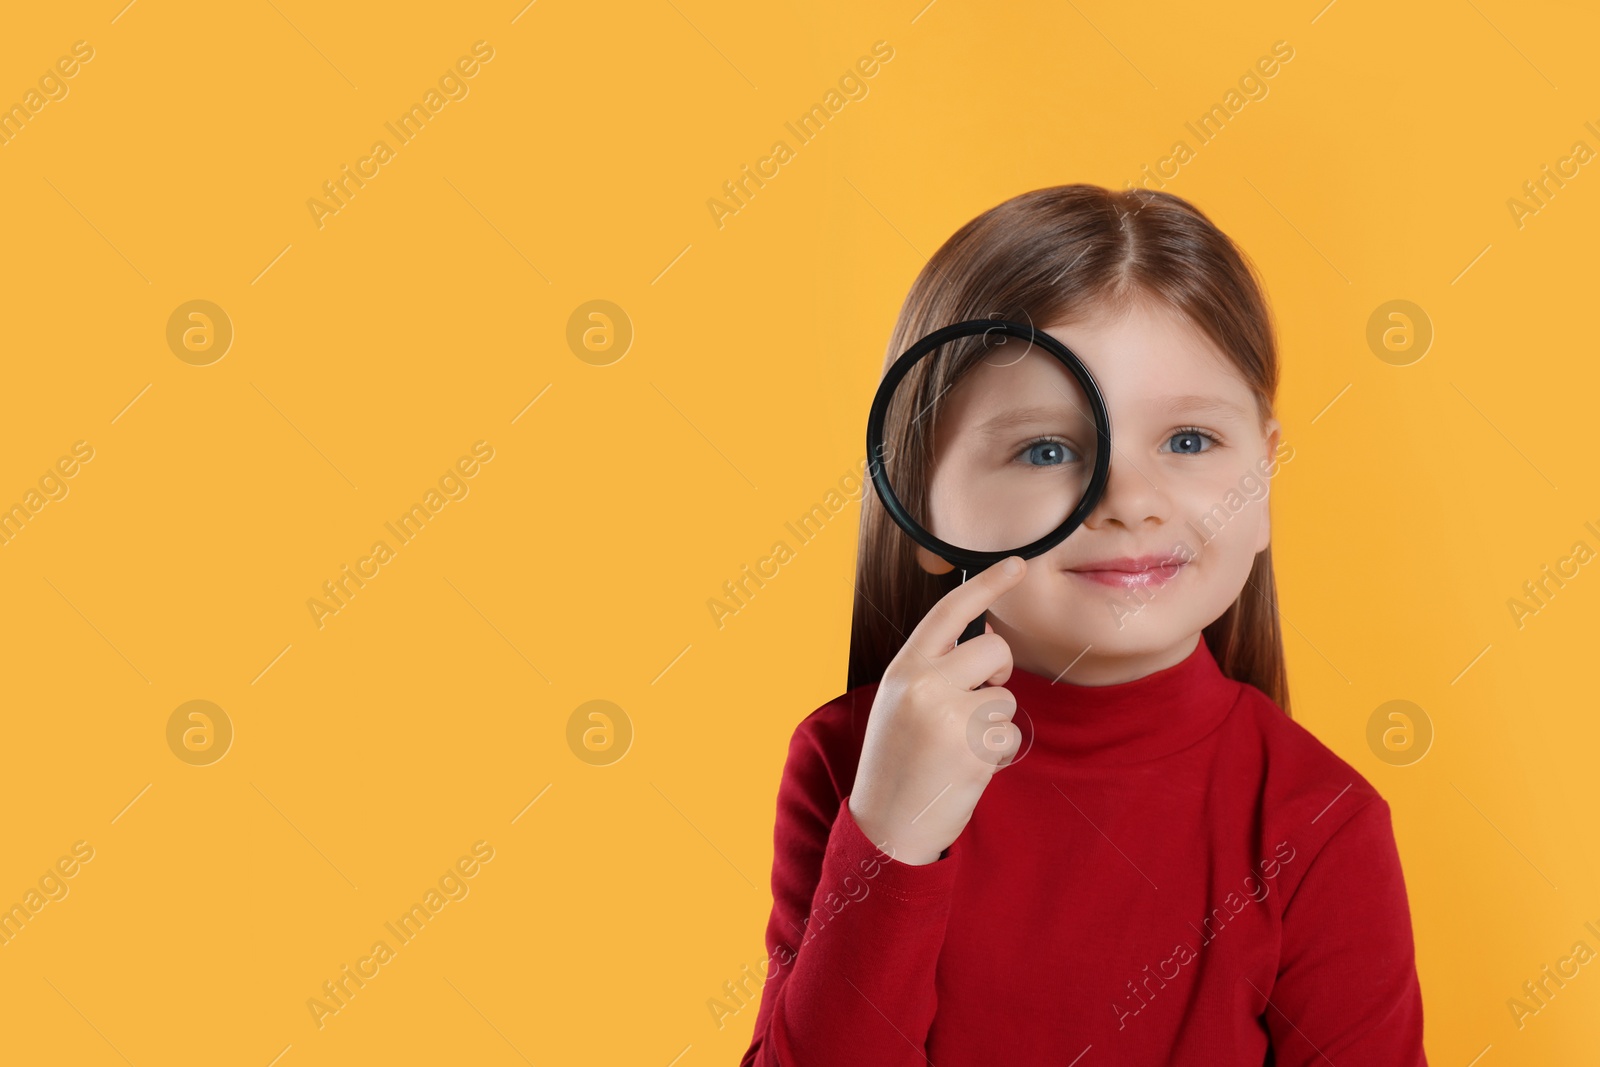 Photo of Cute little girl looking through magnifier on yellow background. Space for text